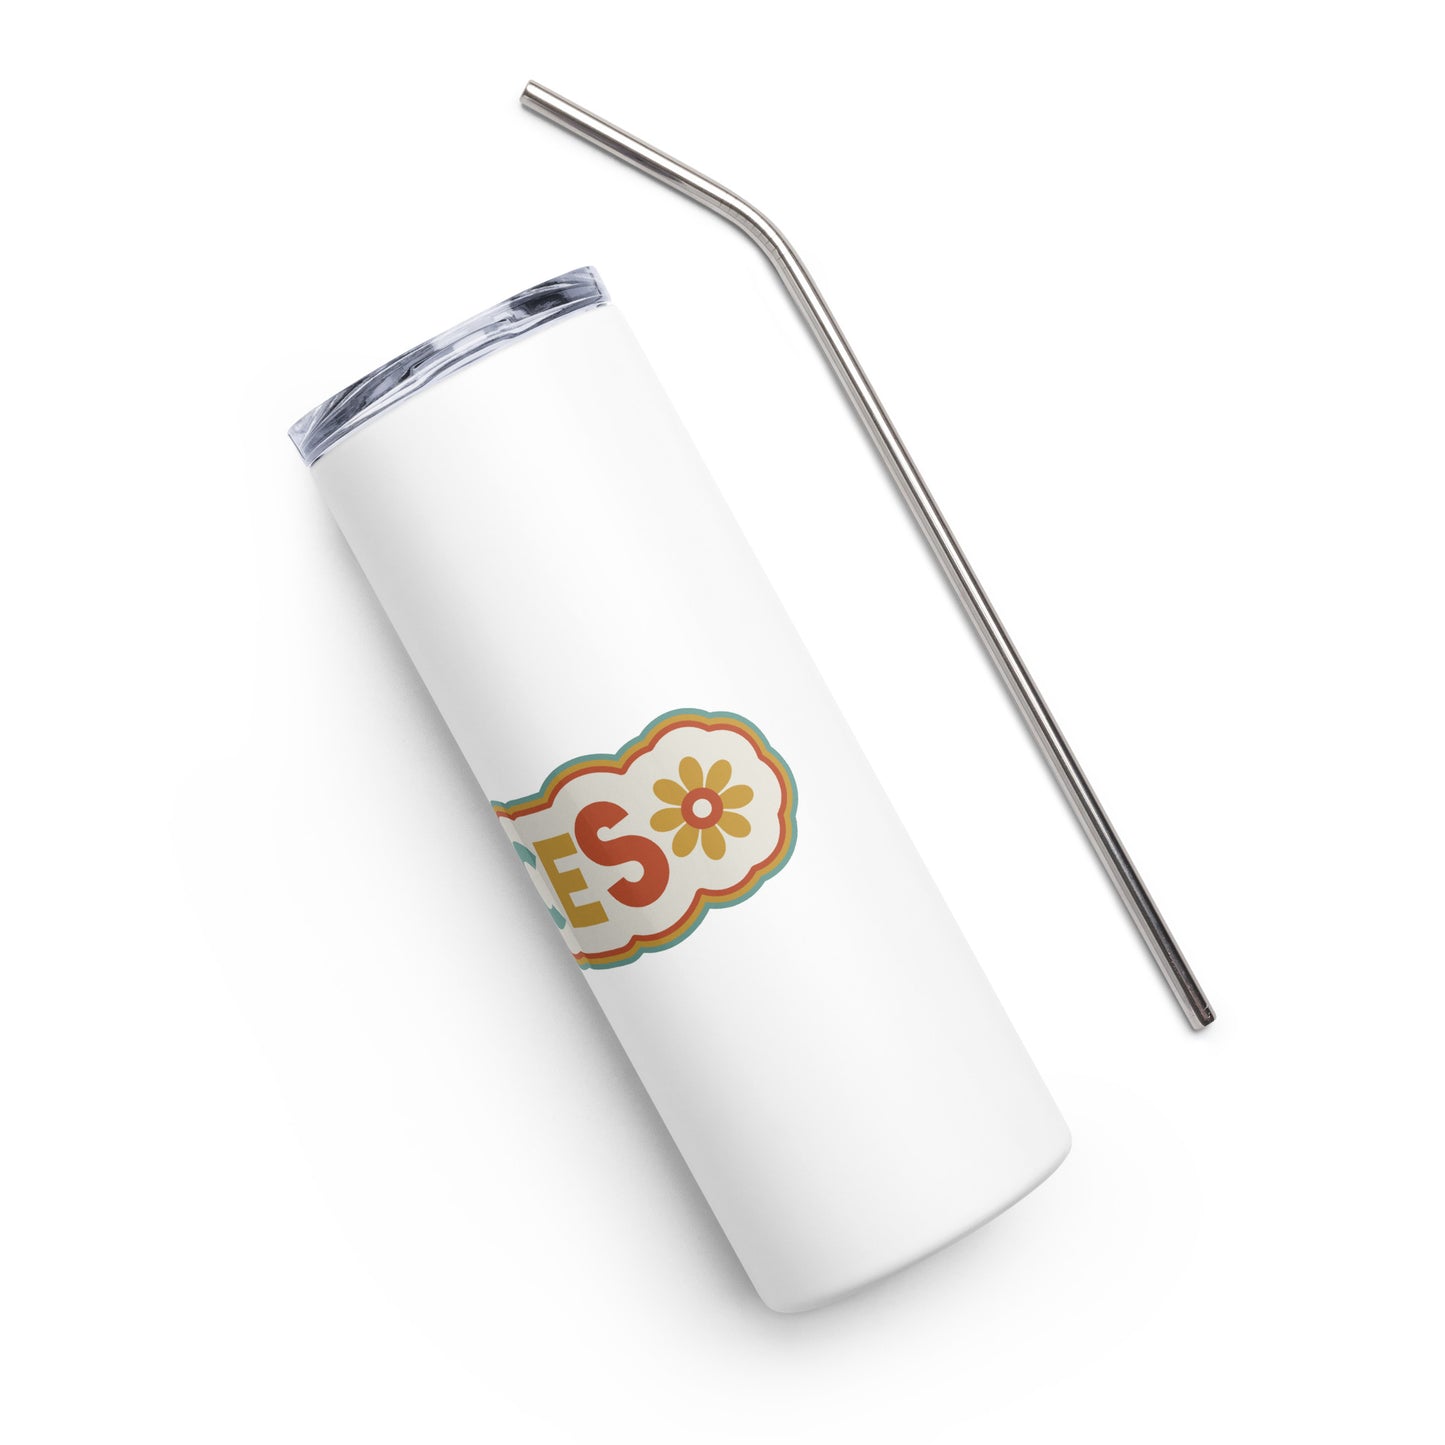 Pisces Stainless steel tumbler